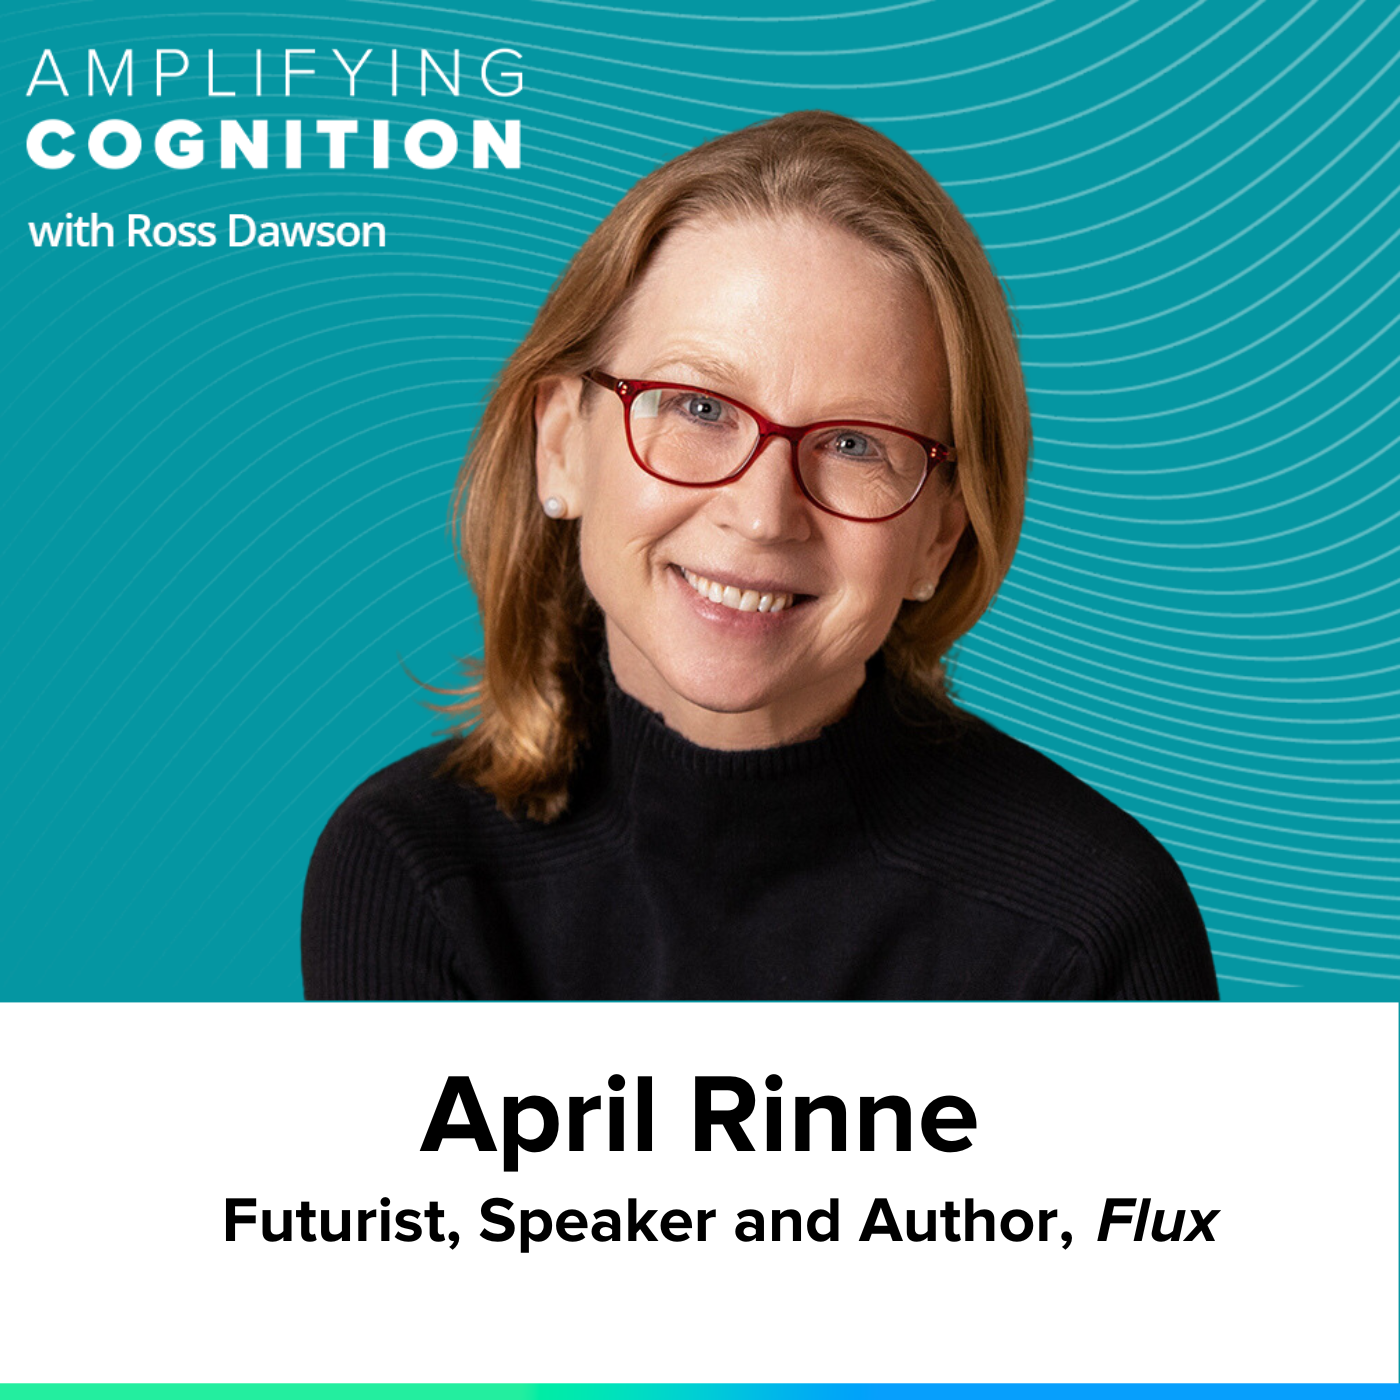 April Rinne on superpowers for thriving, seeing opportunities, prioritizing humanity, and calendar brain (AC Ep8)